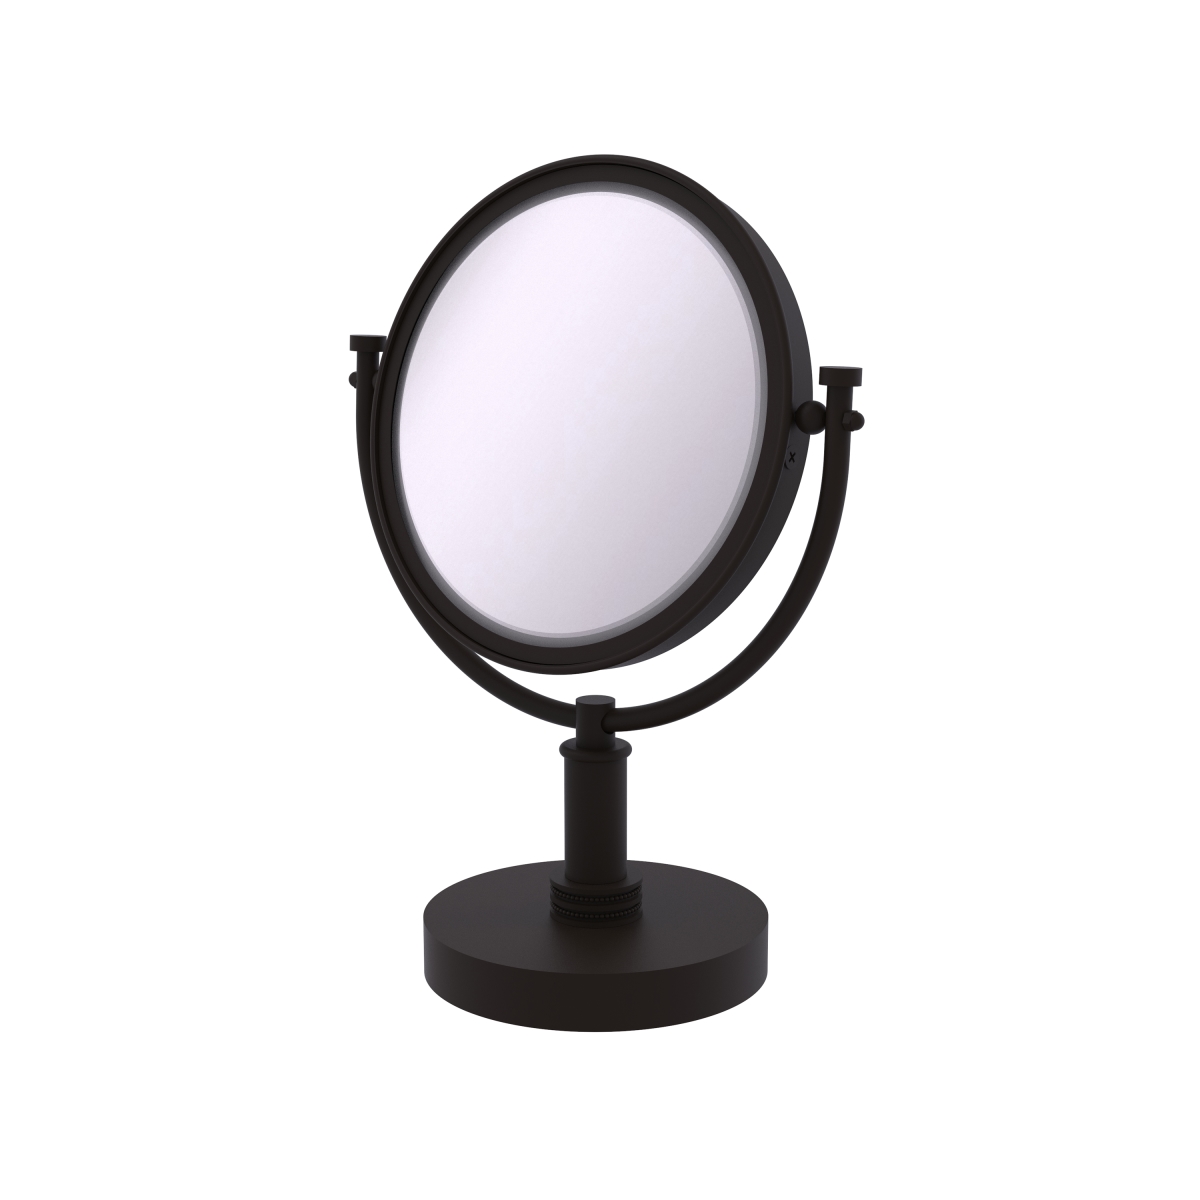 Dm-4d-5x-orb Dotted Ring Style 8 In. Vanity Top Make-up Mirror 5x Magnification, Oil Rubbed Bronze